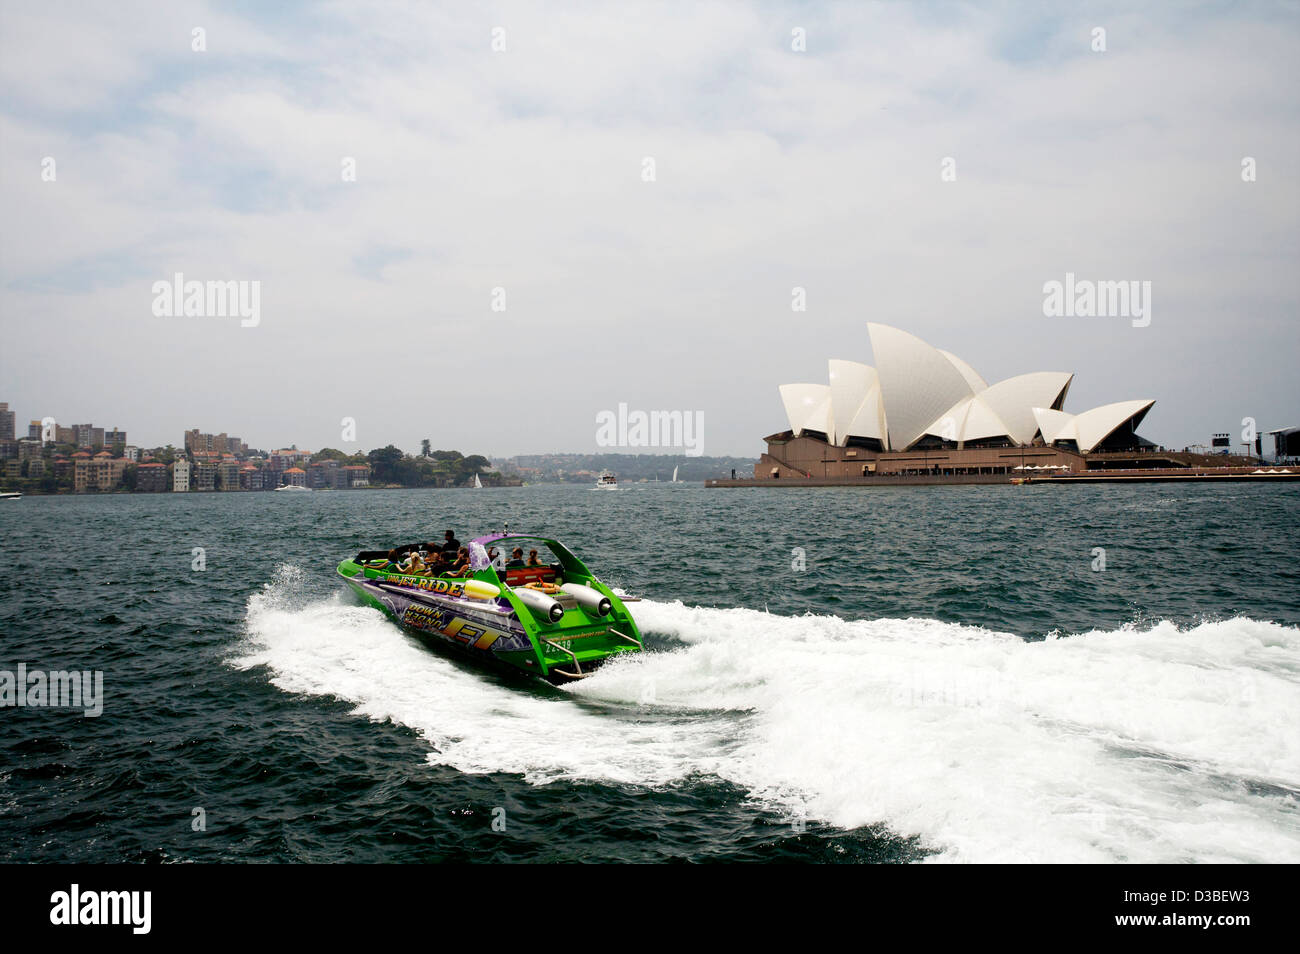 Das Sydney Opera House Performing Arts Centre in Sydney, New South Wales, Australien Stockfoto